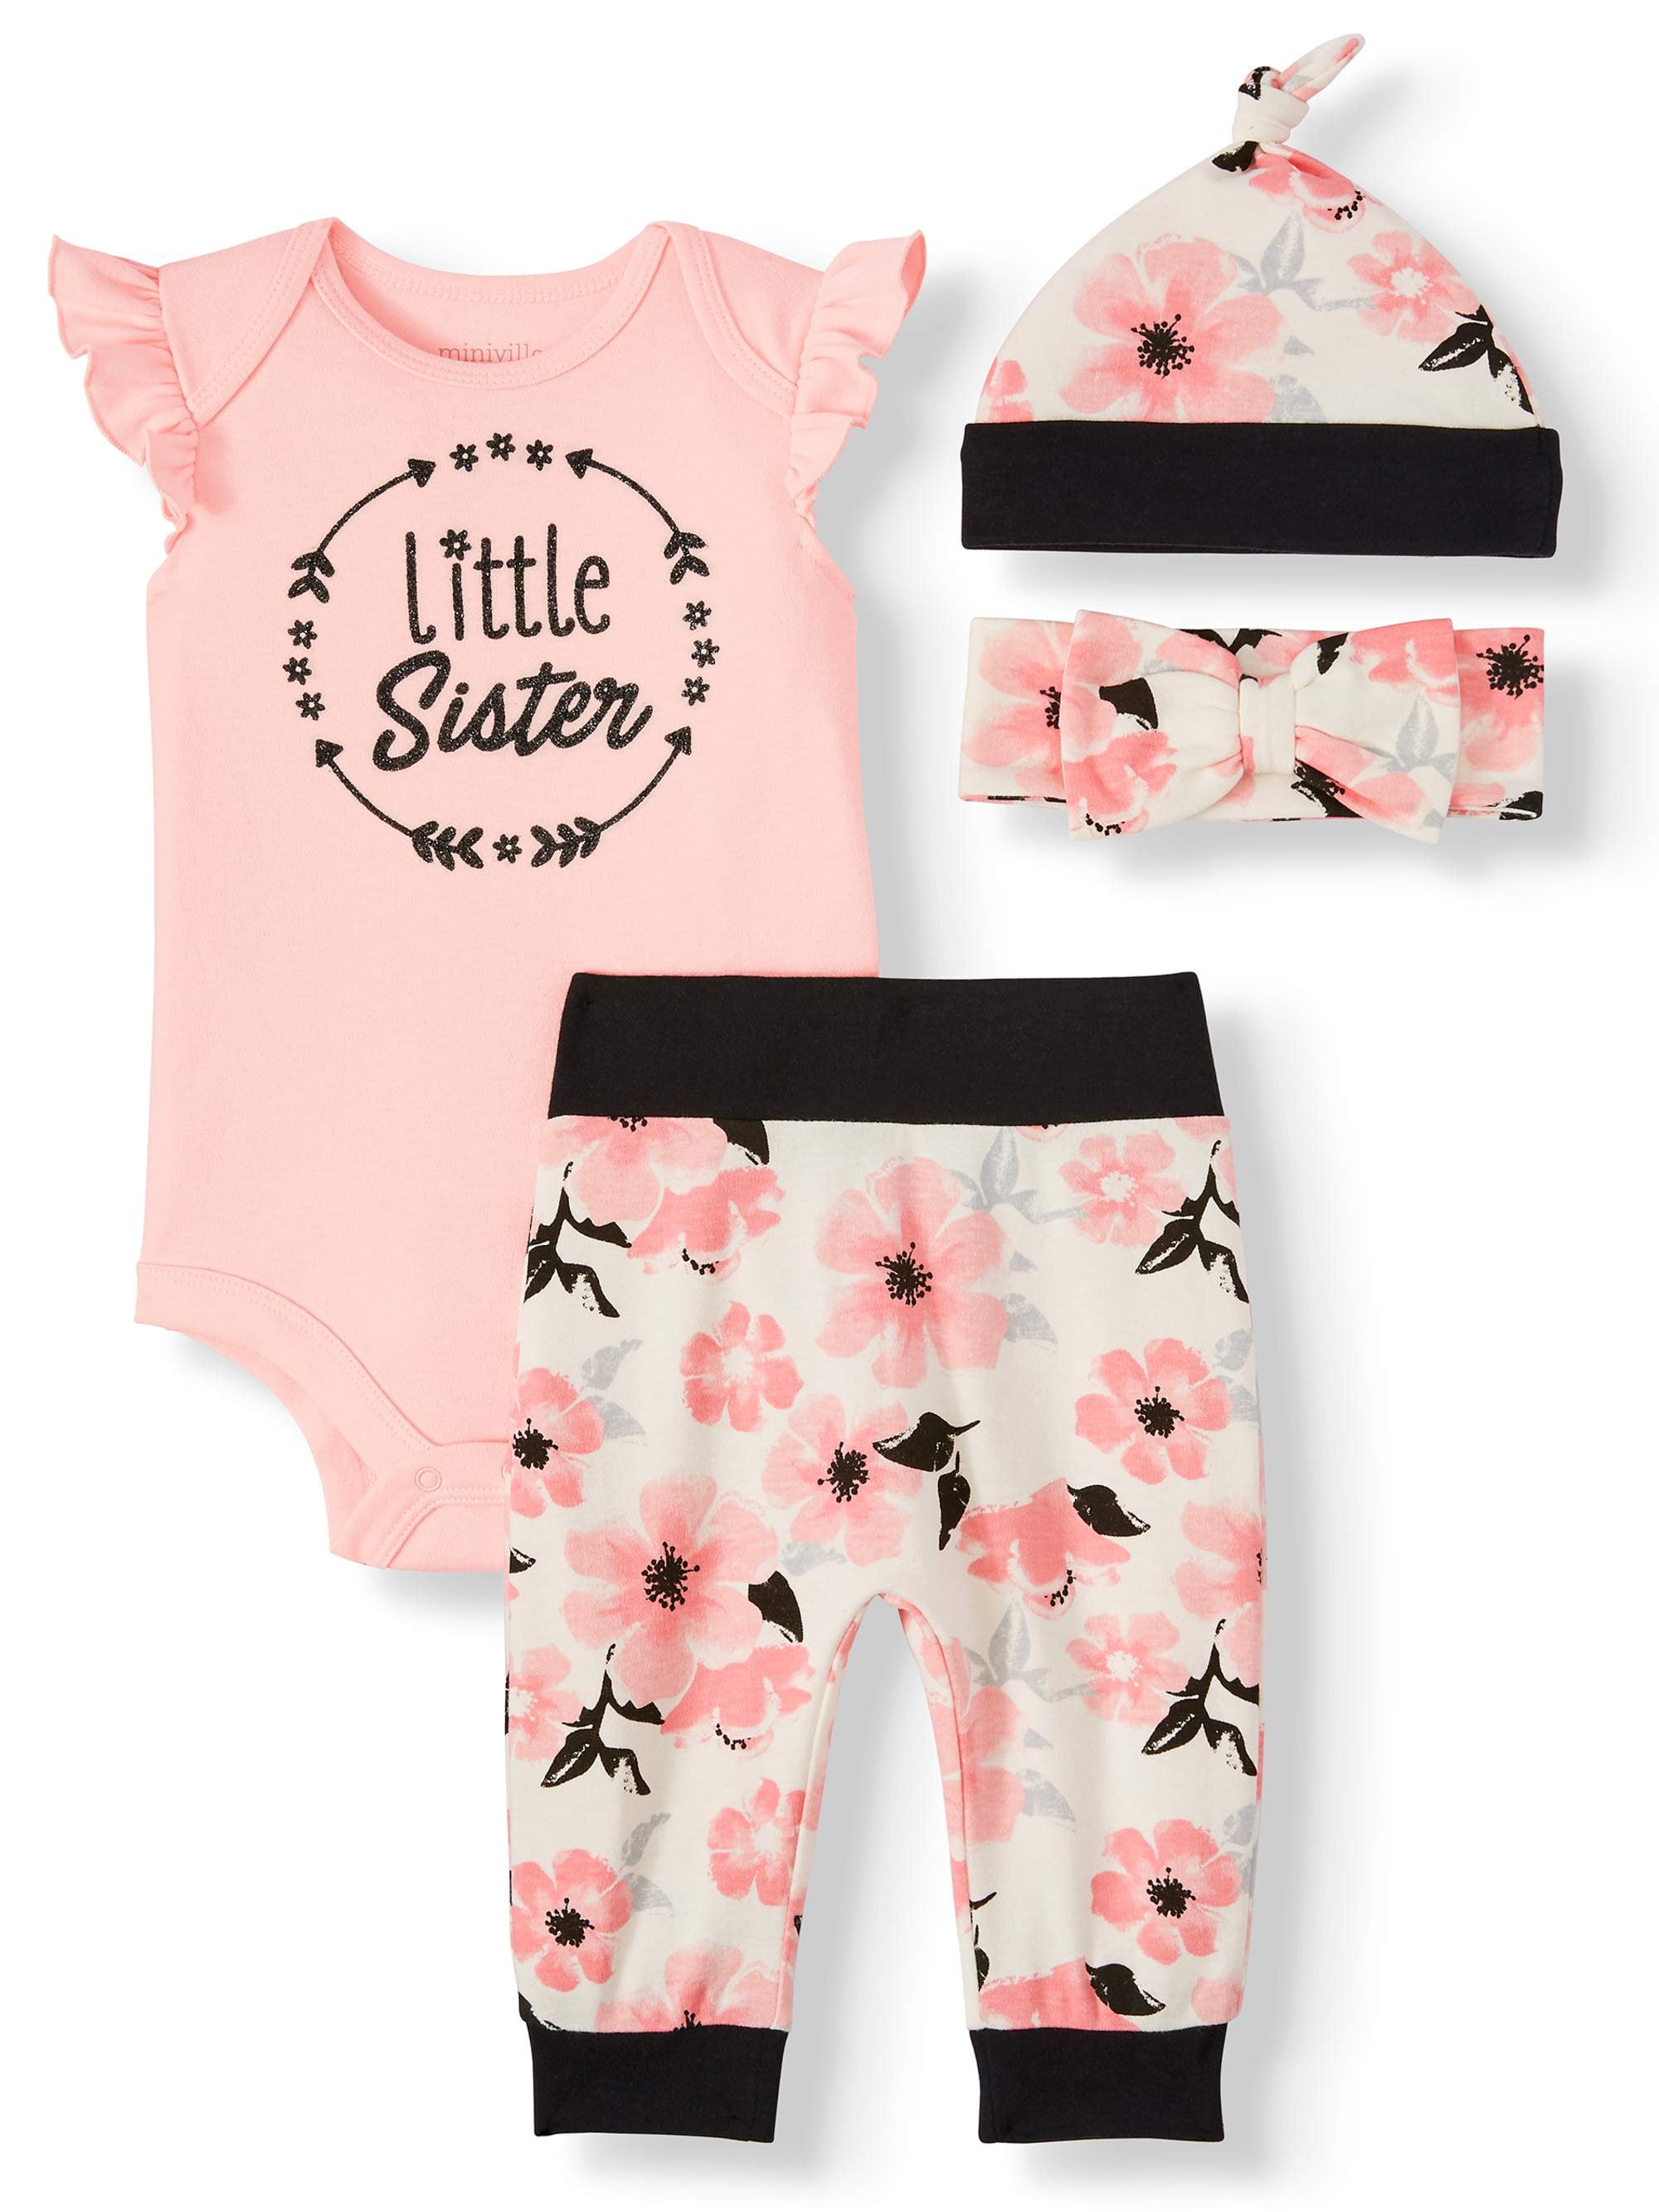 reebok baby girl clothes - 64% OFF 